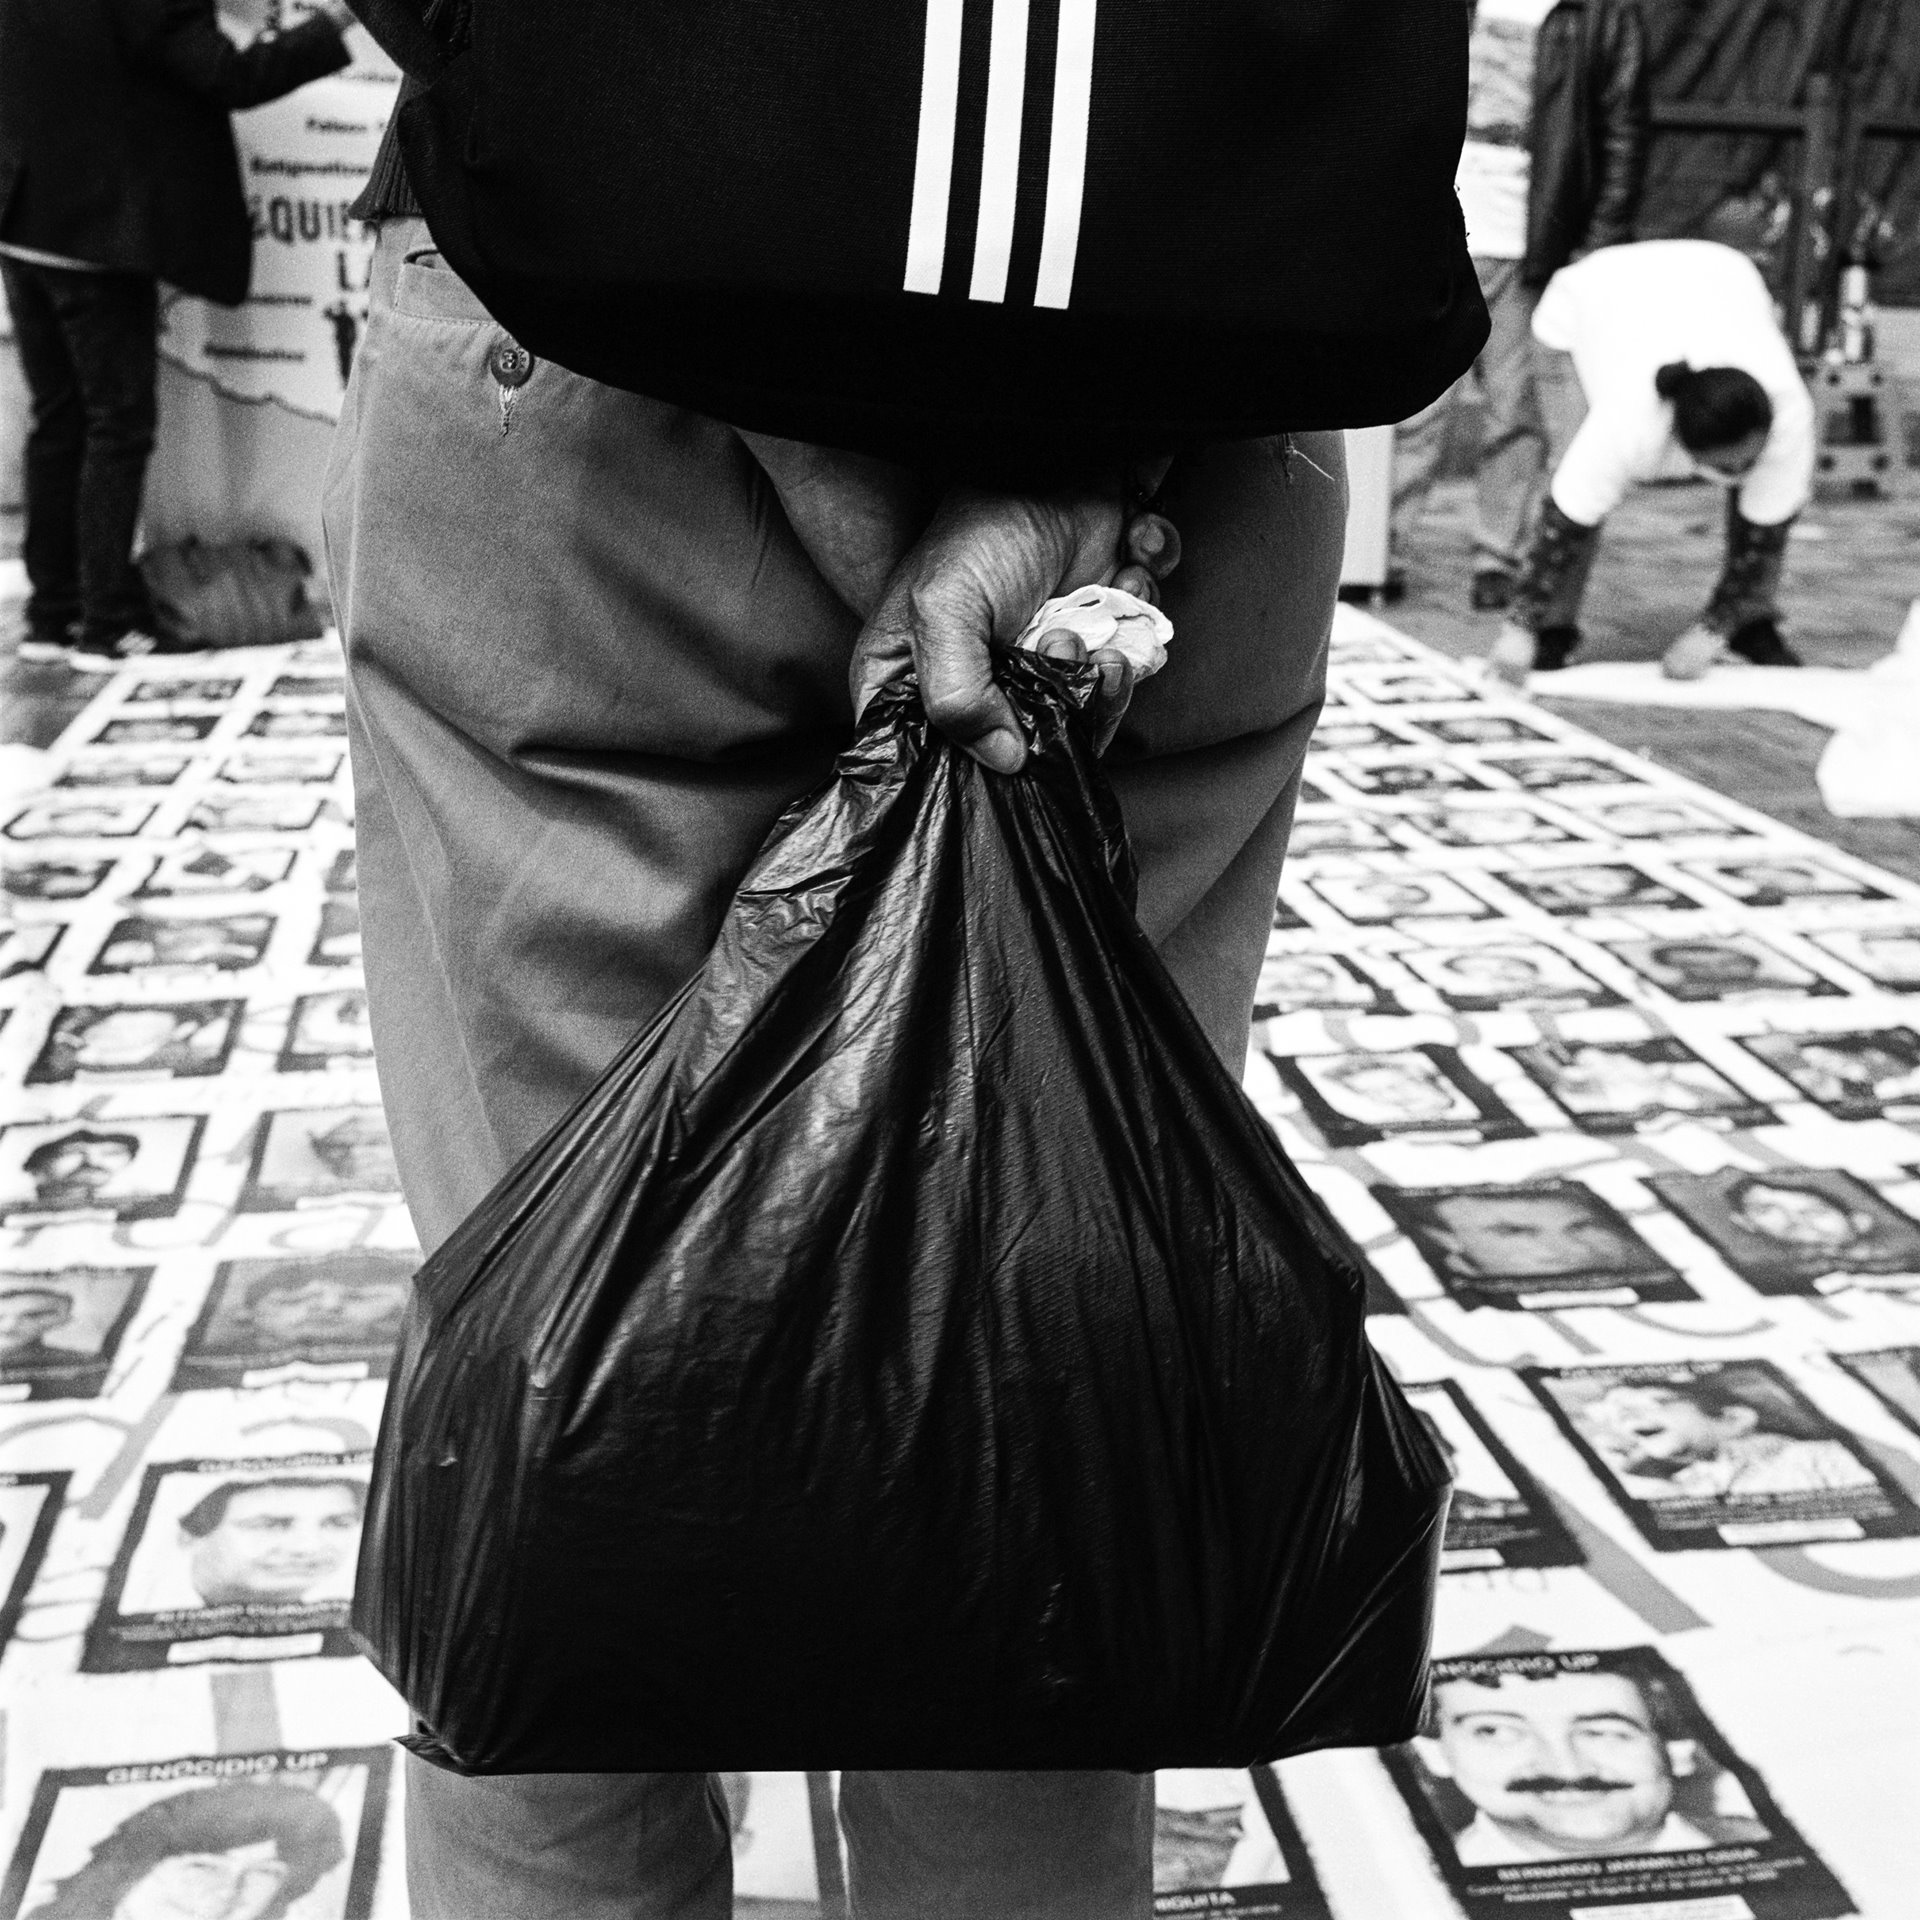 A passer-by looks at the photographs of missing persons, during a protest organized by the National Movement of Victims of State Crimes (MOVICE), on the 35th anniversary of the siege of the Palace of Justice in Bogotá, Colombia. In November 1985, members of the leftist M-19 guerrilla group took over the Palace of Justice in Bogotá, taking hundreds of people hostage, including all 25 of the Supreme Court justices. The Colombian army stormed and retook the palace, in an operation that left up to 100 people dead, including many justices. Eleven survivors were taken away by the military and never seen again.